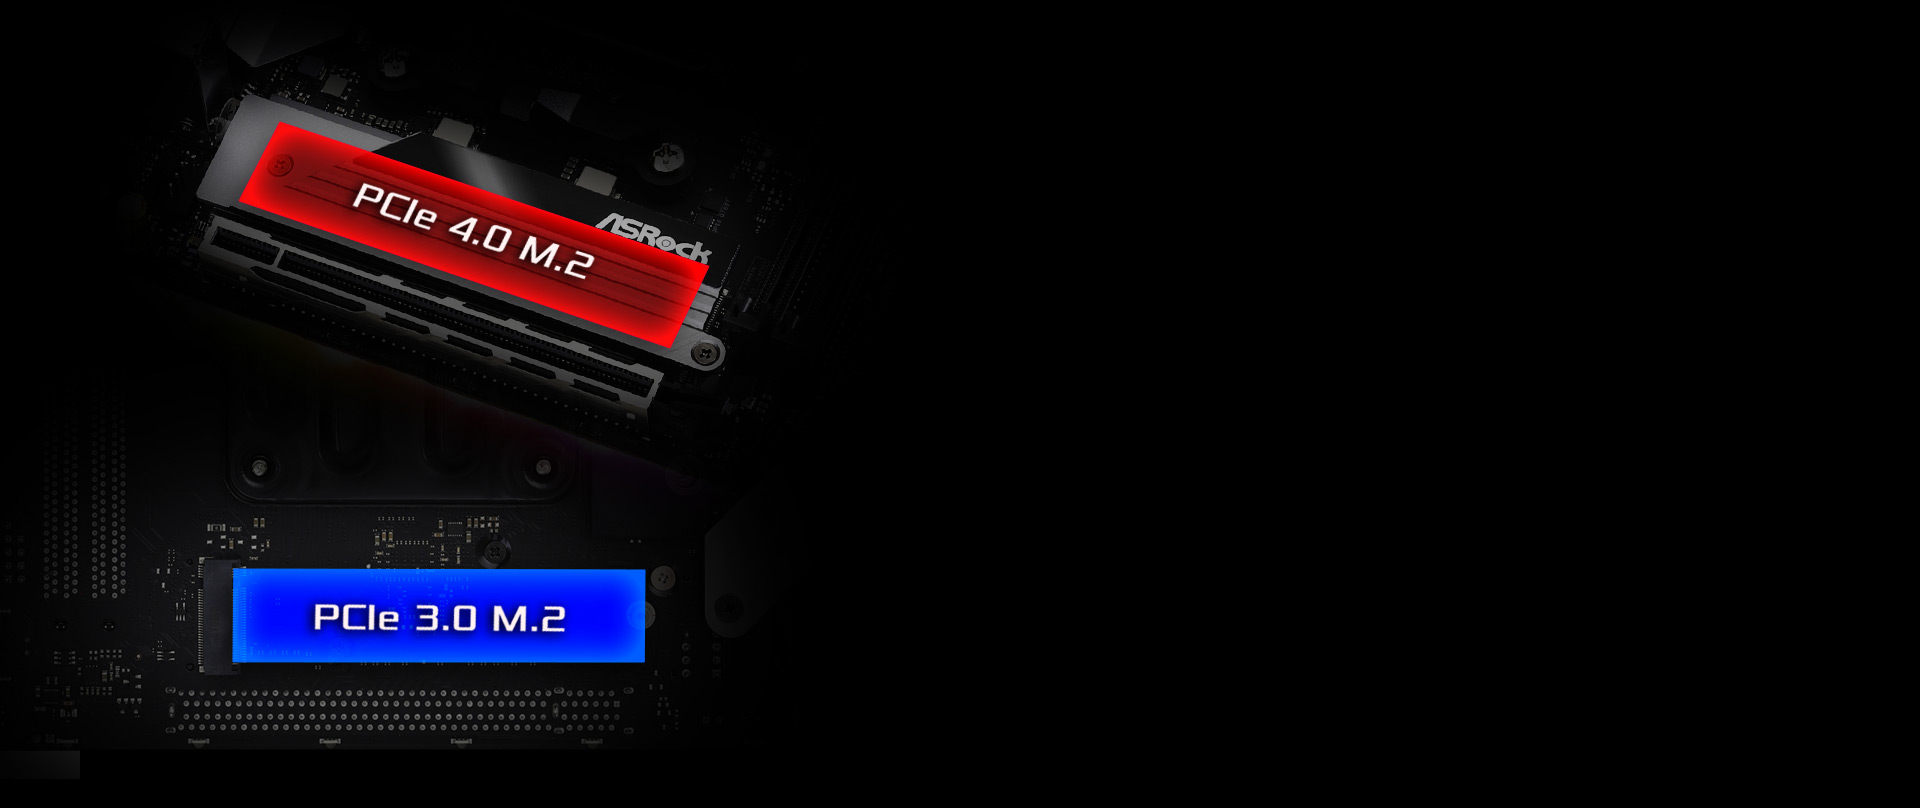 DualM2-SSD-B550 Pro4 of the  motherboard